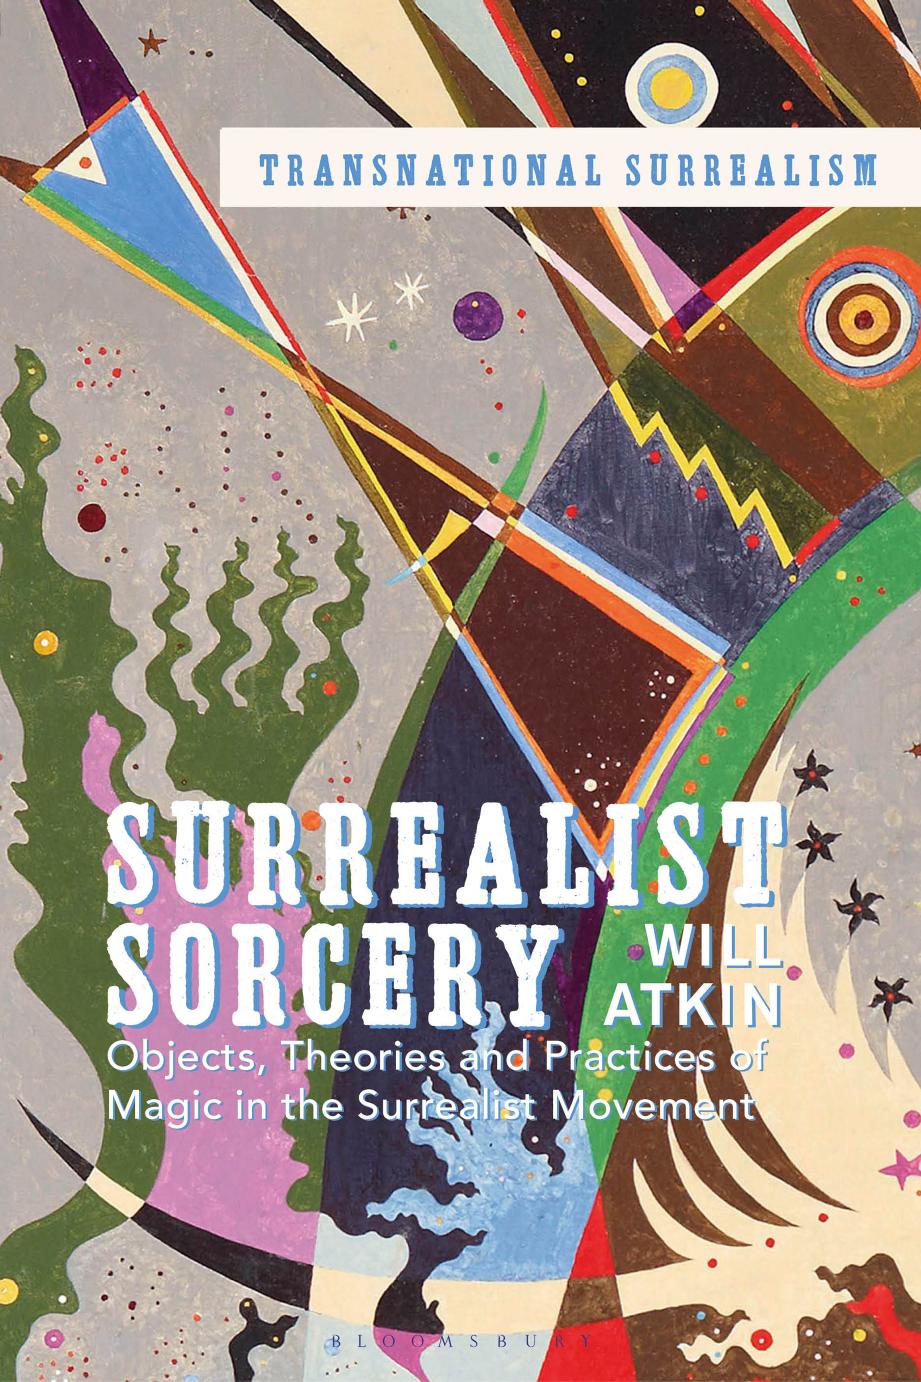 Surrealist Sorcery: Objects, Theories and Practices of Magic in the Surrealist Movement by Will Atkin